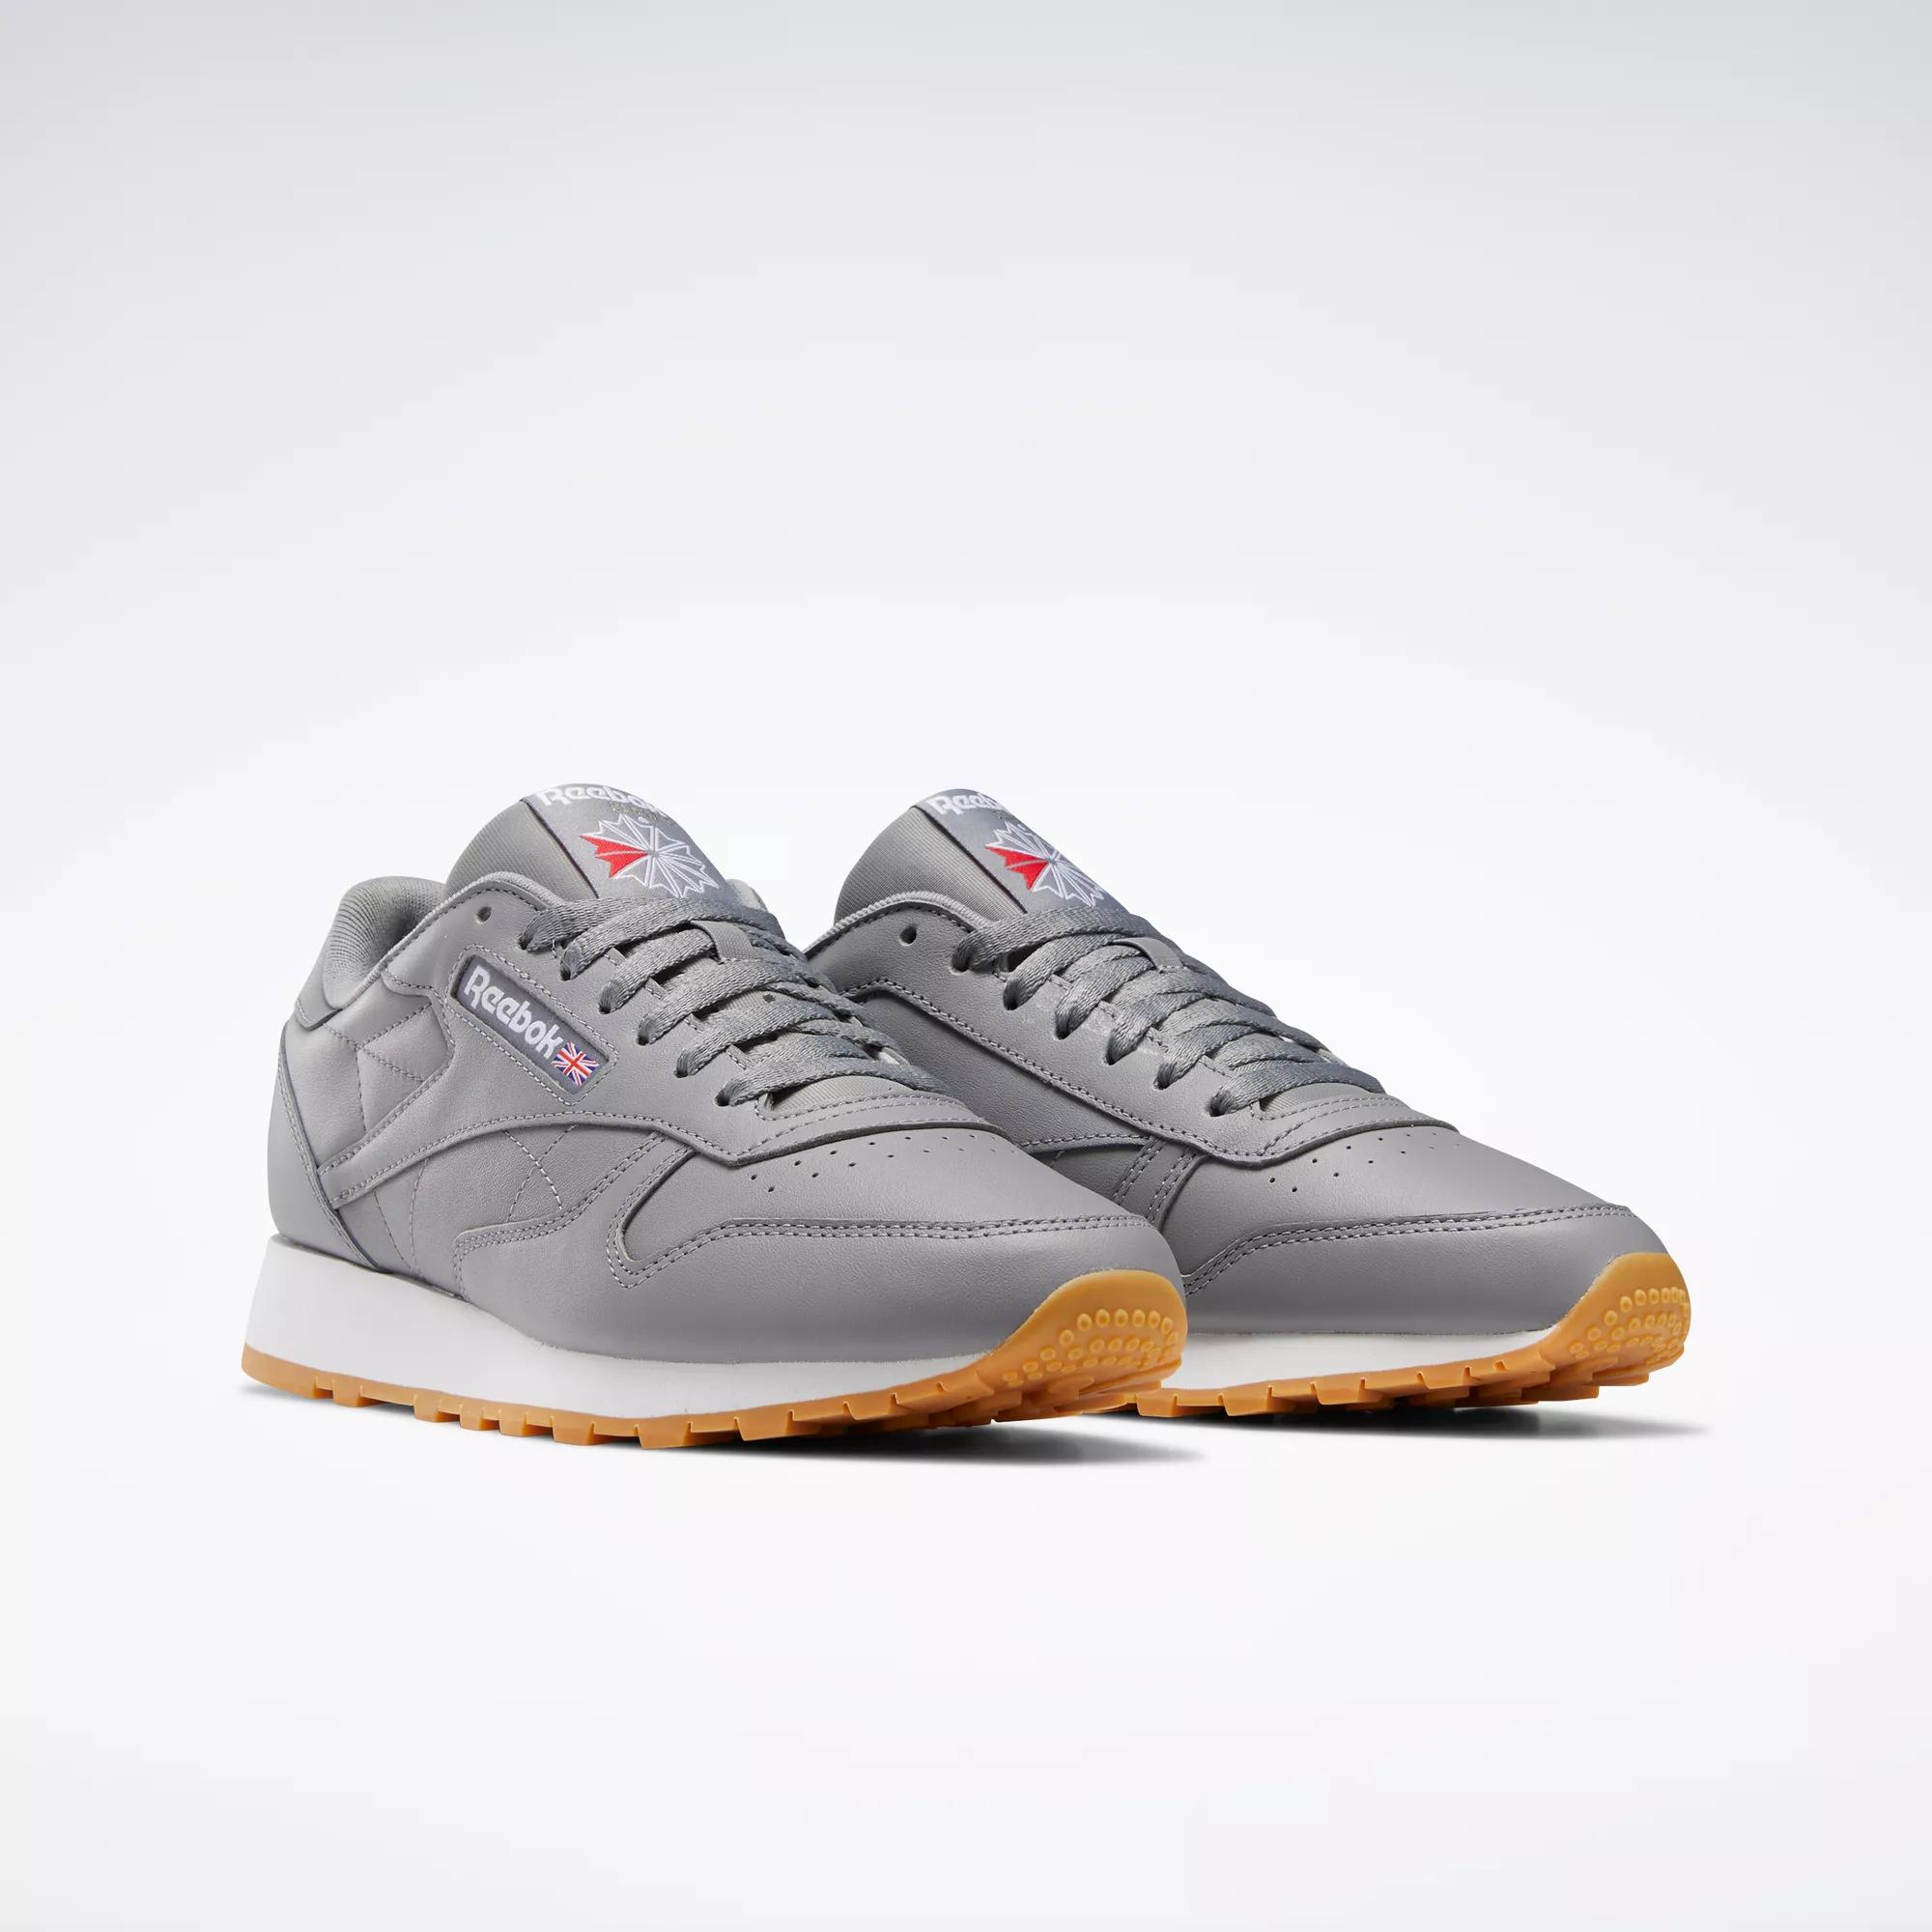 Classic Leather Shoes - Grey 5 / Ftwr White / Rubber Gum-03 | Reebok